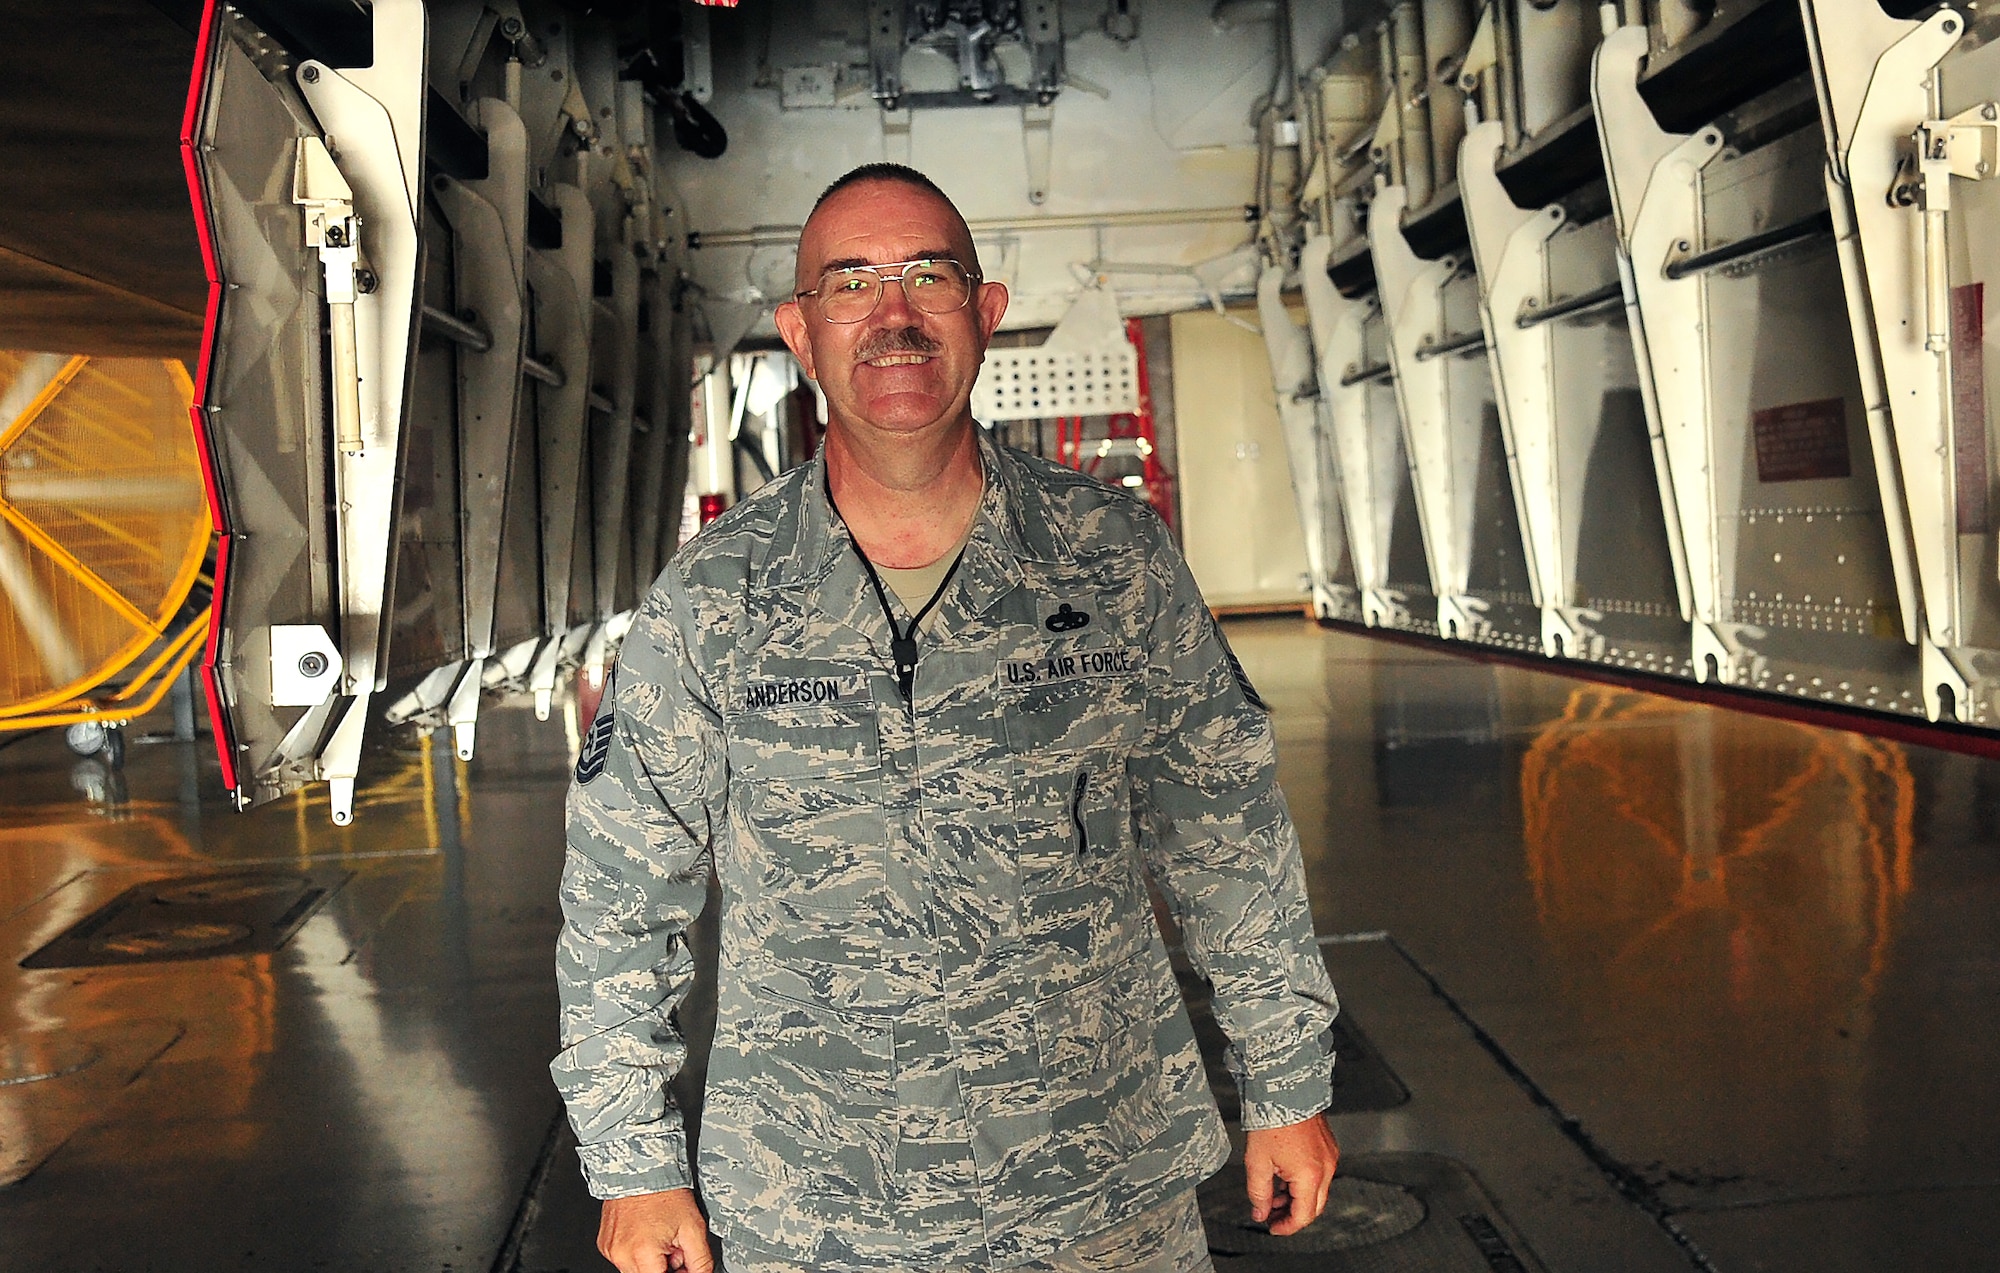 U.S. Air Force Master Sgt. Allen Anderson, an aircraft armament systems mechanic assigned to the 131st Aircraft Maintenance Squadron, smiles after successfully completing steps for his certification training at Whiteman Air Force Base, Mo., June 28, 2016. Anderson is certified to load various munitions and now holds the four man role on his load crew. (U.S. Air Force photo by Senior Airman Jovan Banks)